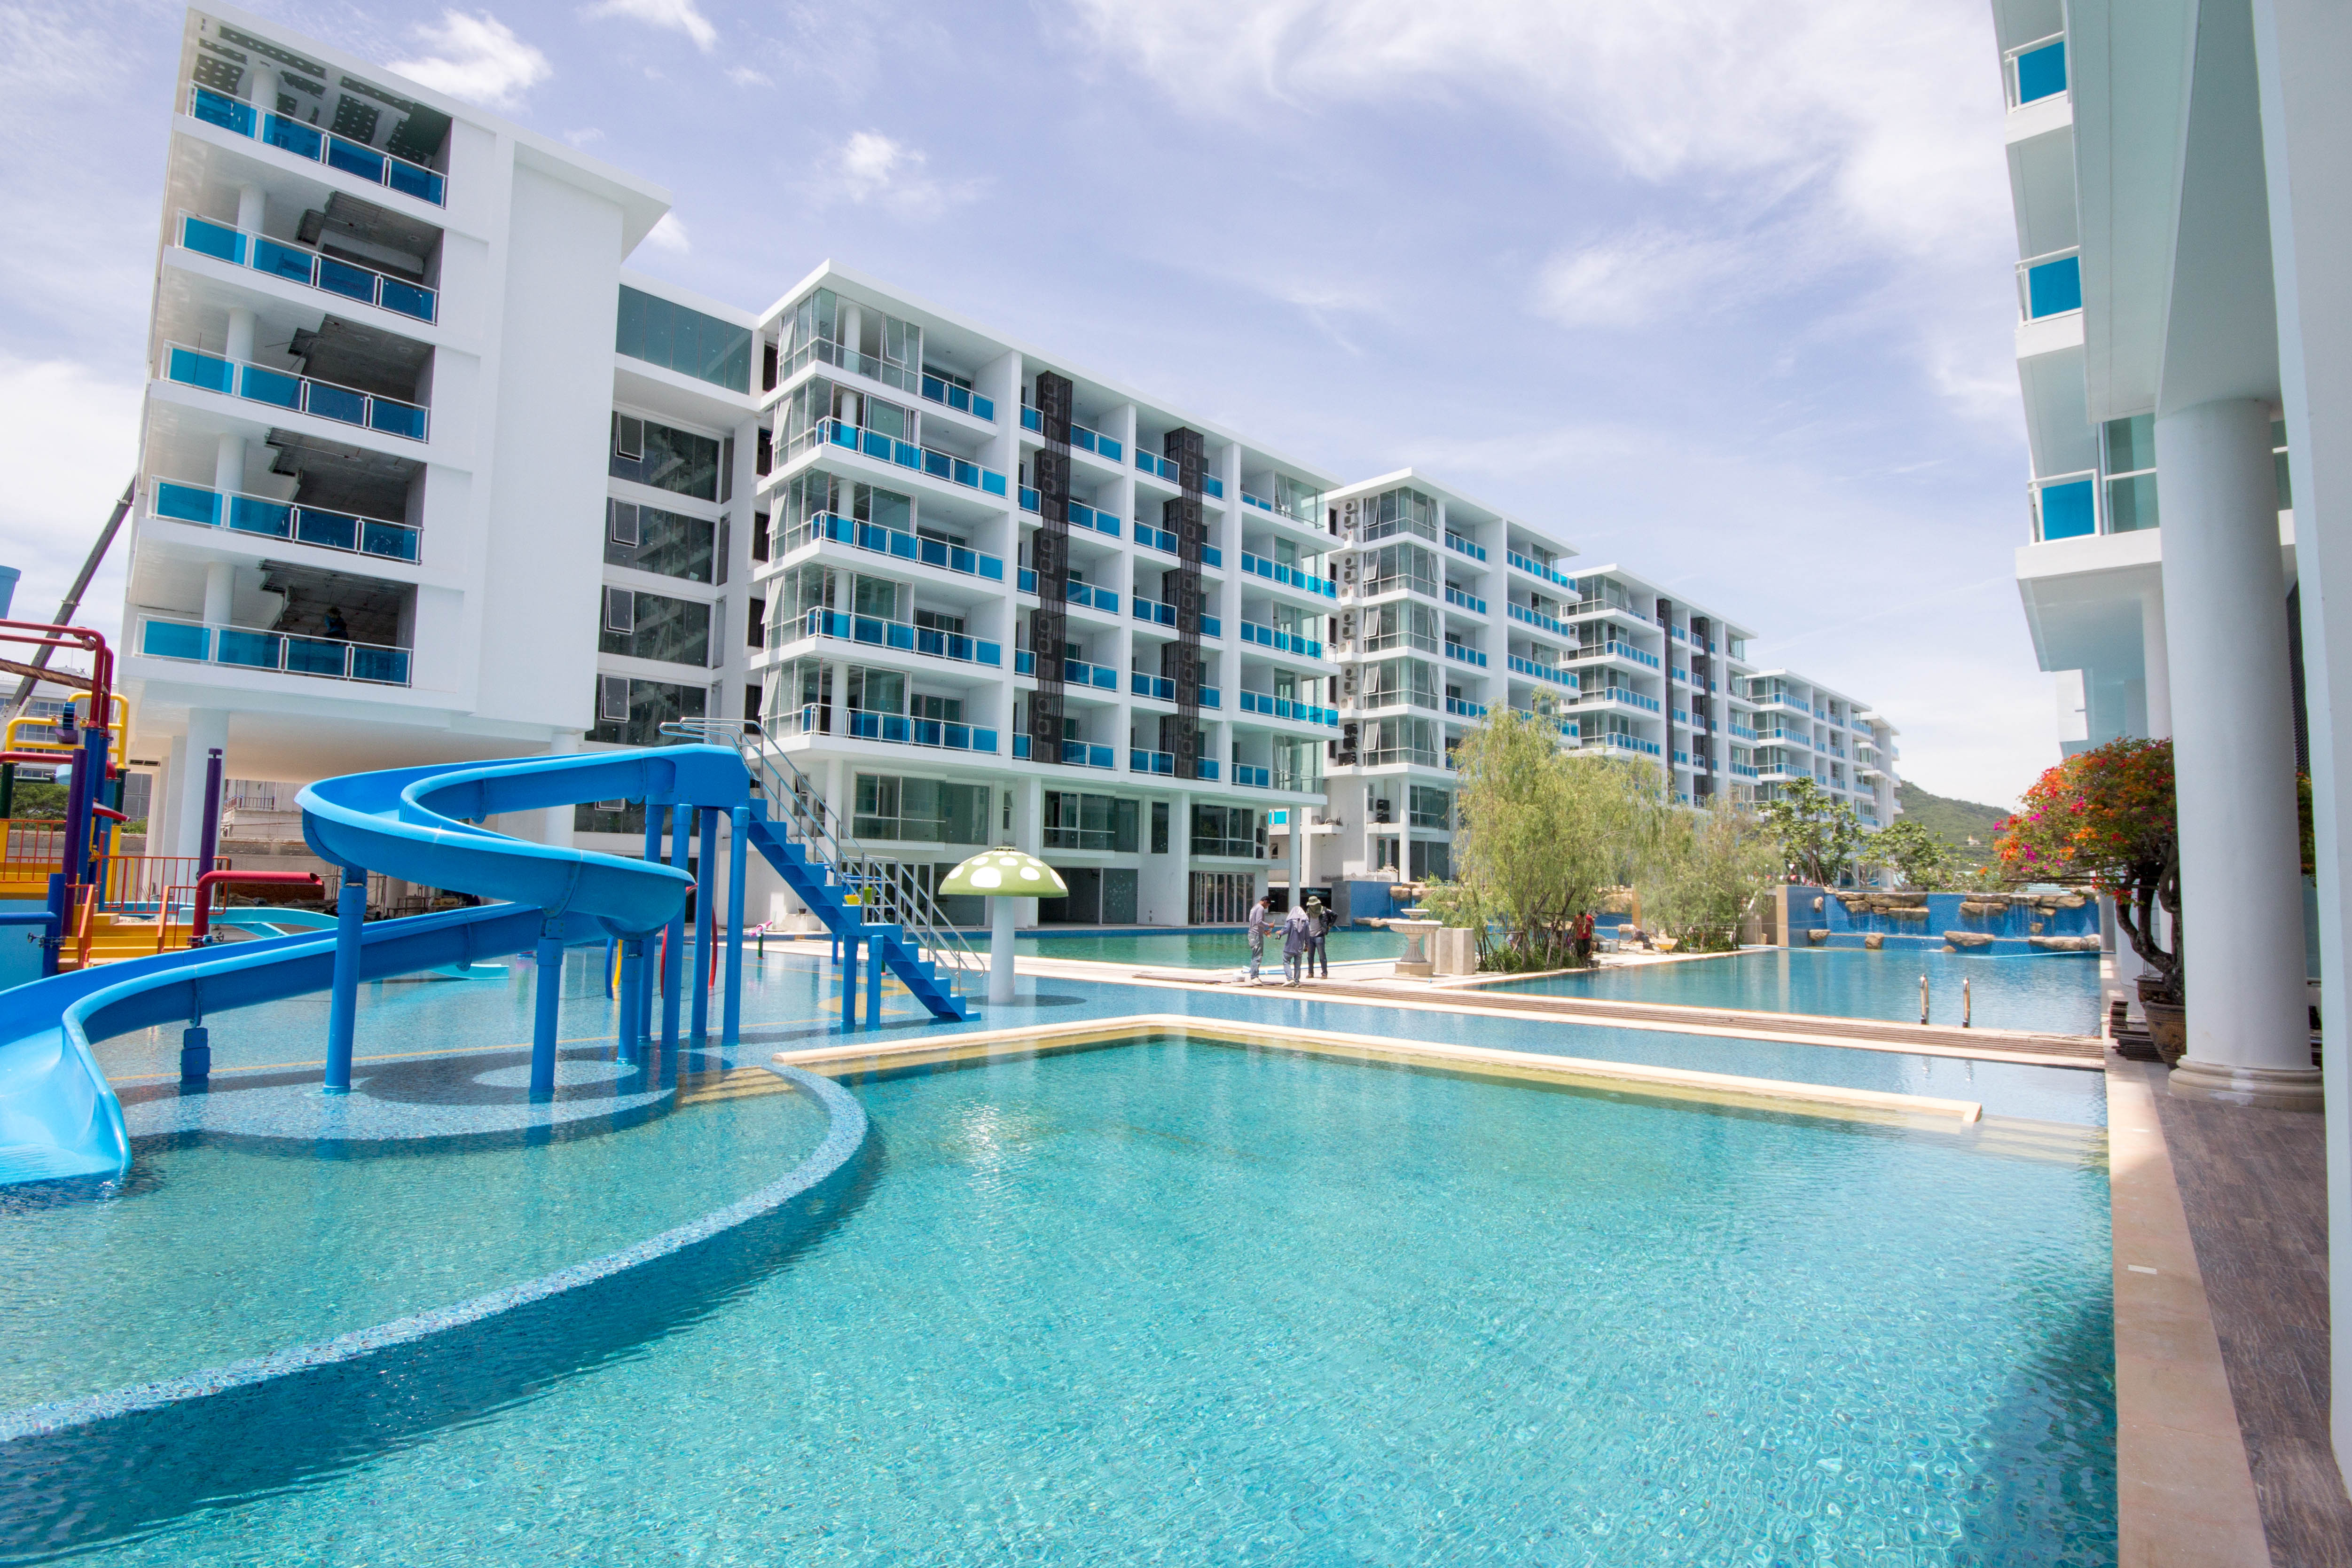 Pool Access Unit at My Resort Condo for Sale